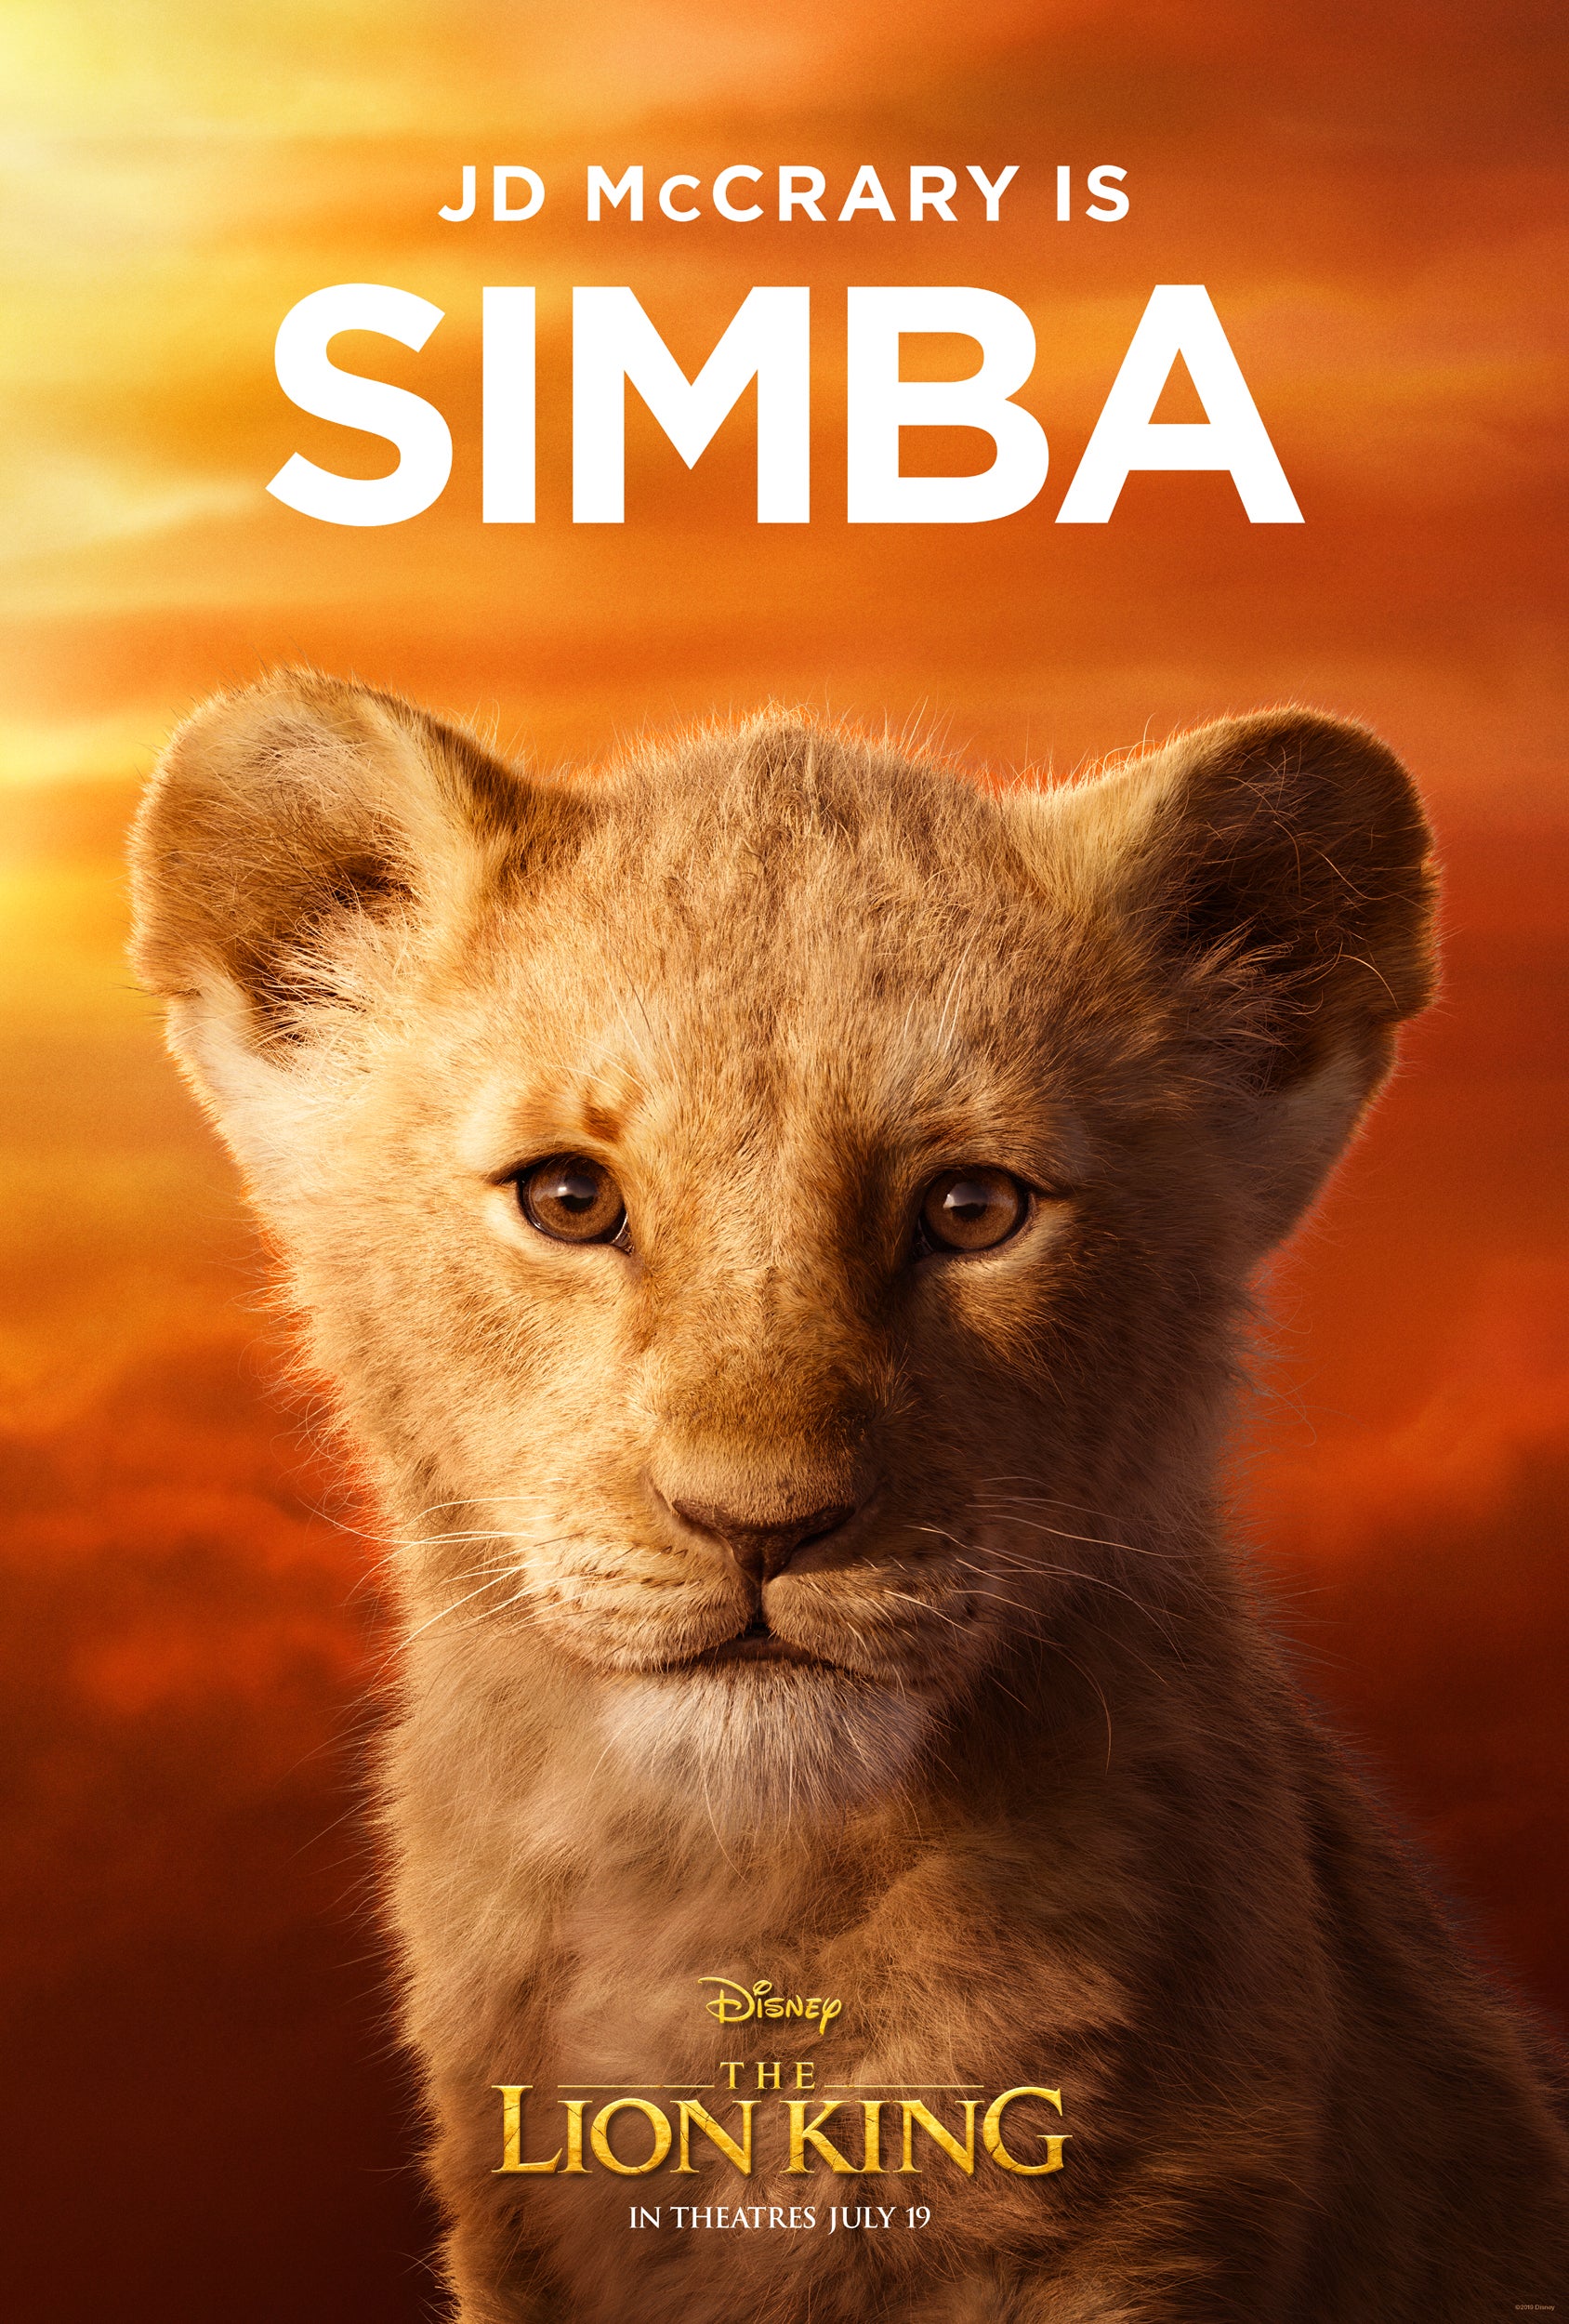 The Lion King Posters Provide A New Look At Donald Glovers Simba Beyoncés Nala And More 